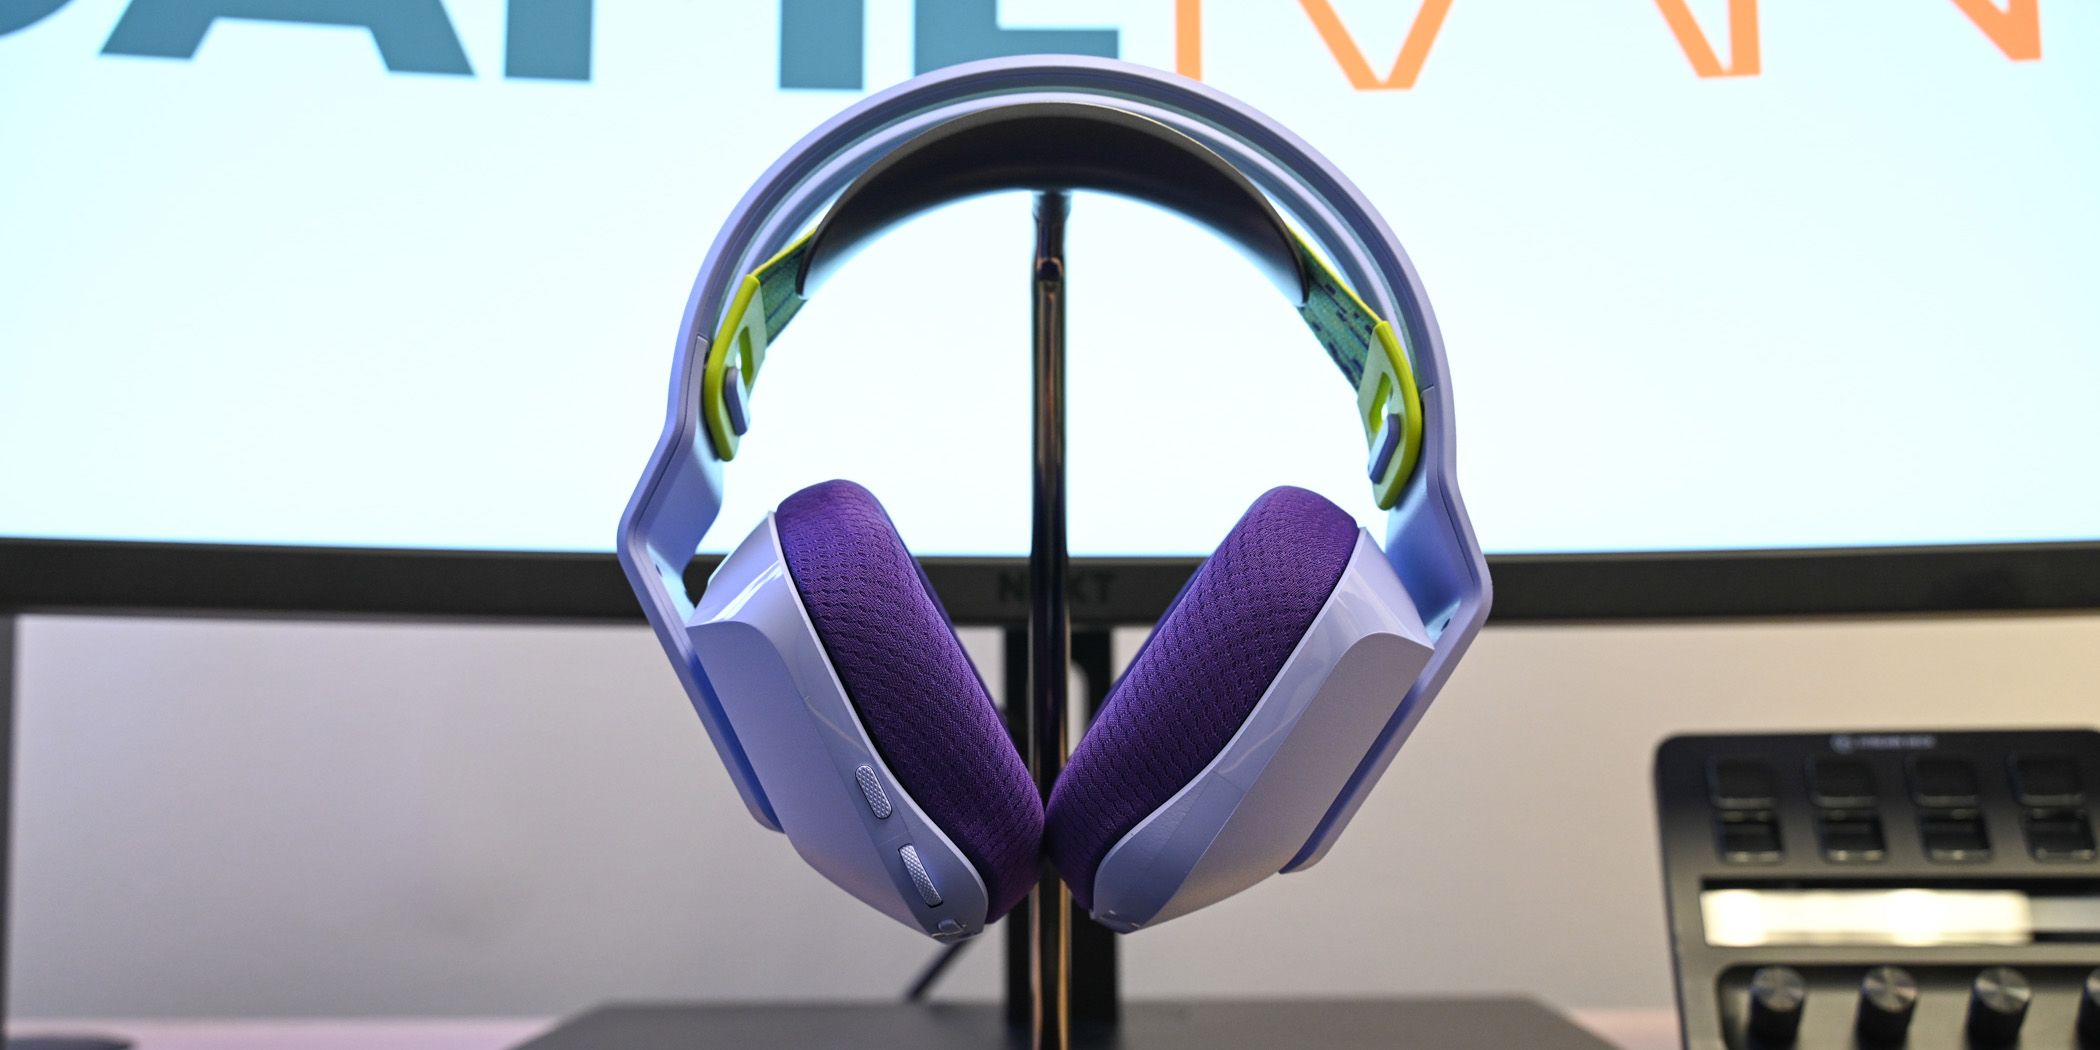 The Logitech G733 headset without the mic plugged in on a headphone stand